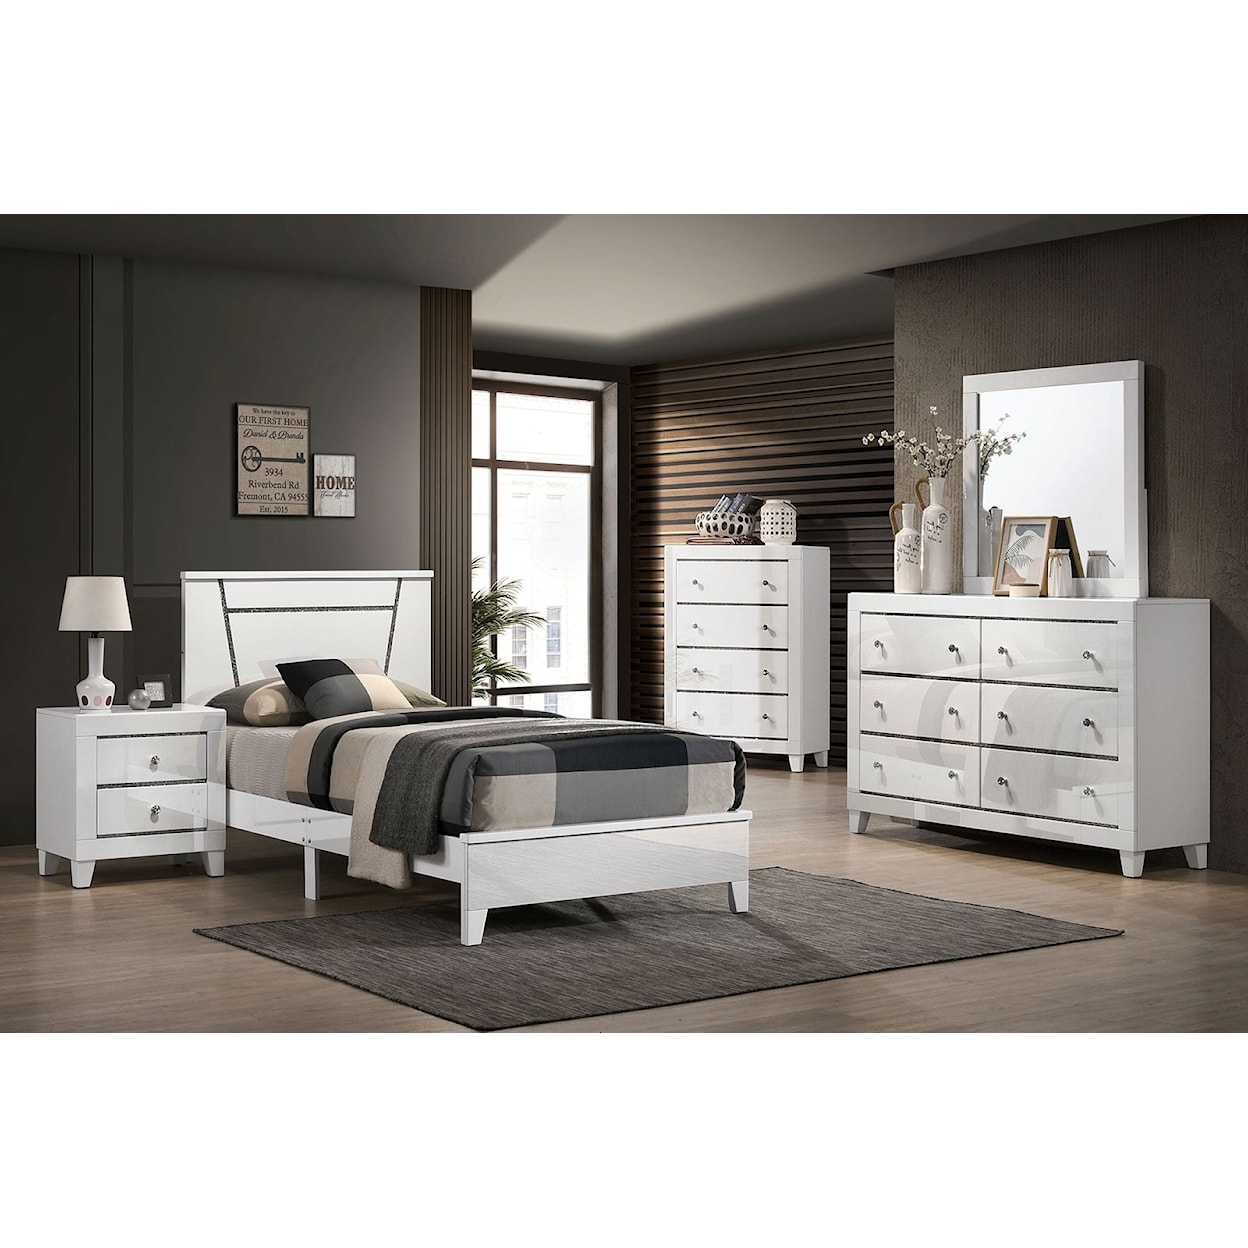 Furniture of America Magdeburg 4 Pc. Twin Bedroom Set